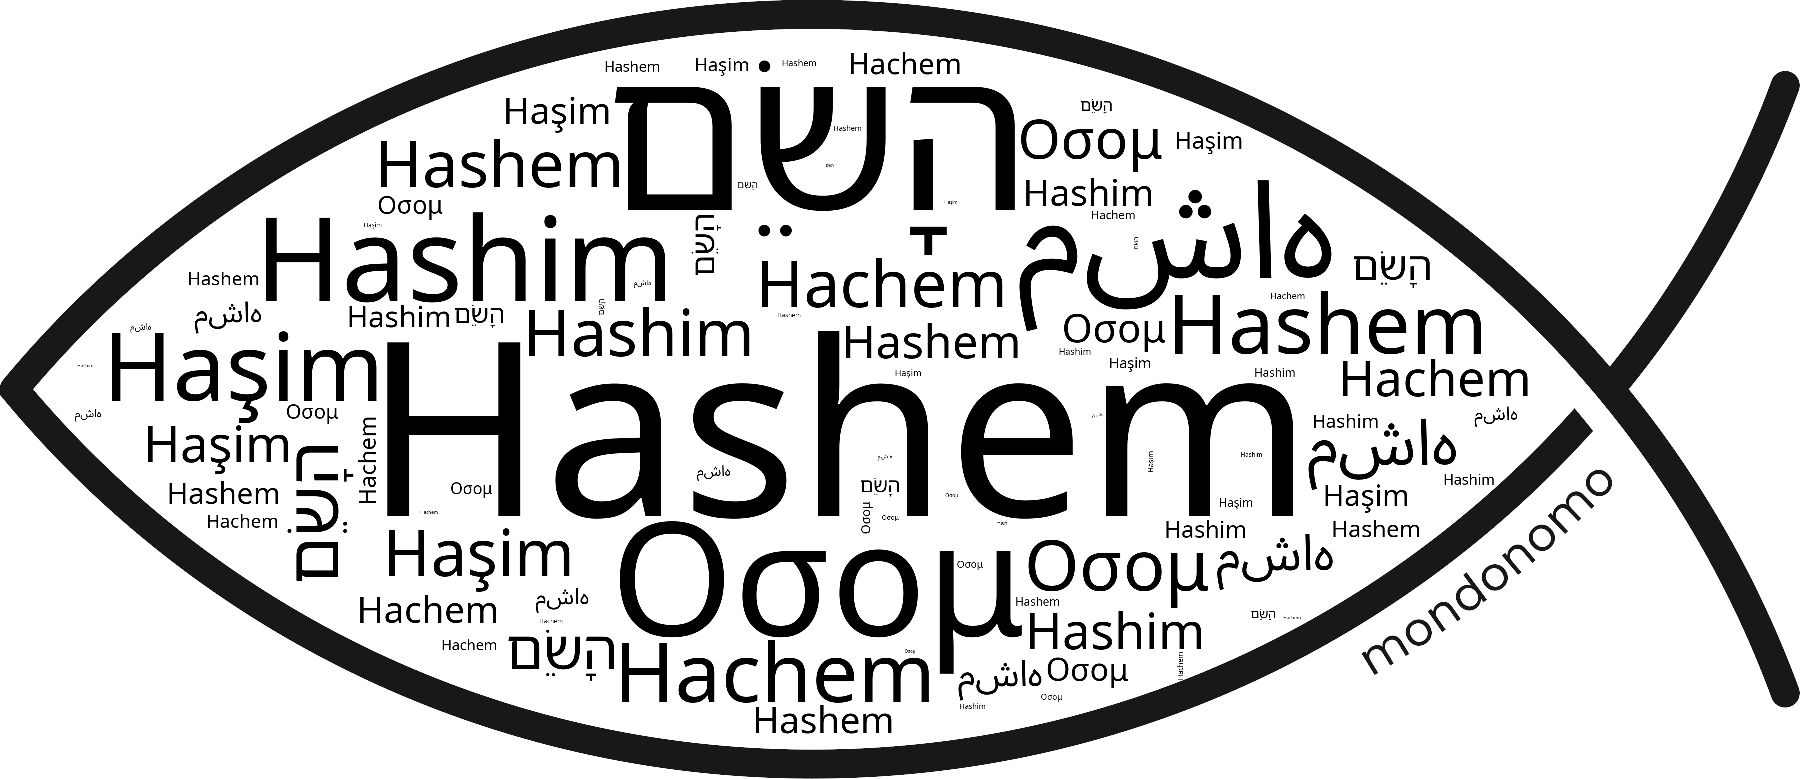 Name Hashem in the world's Bibles